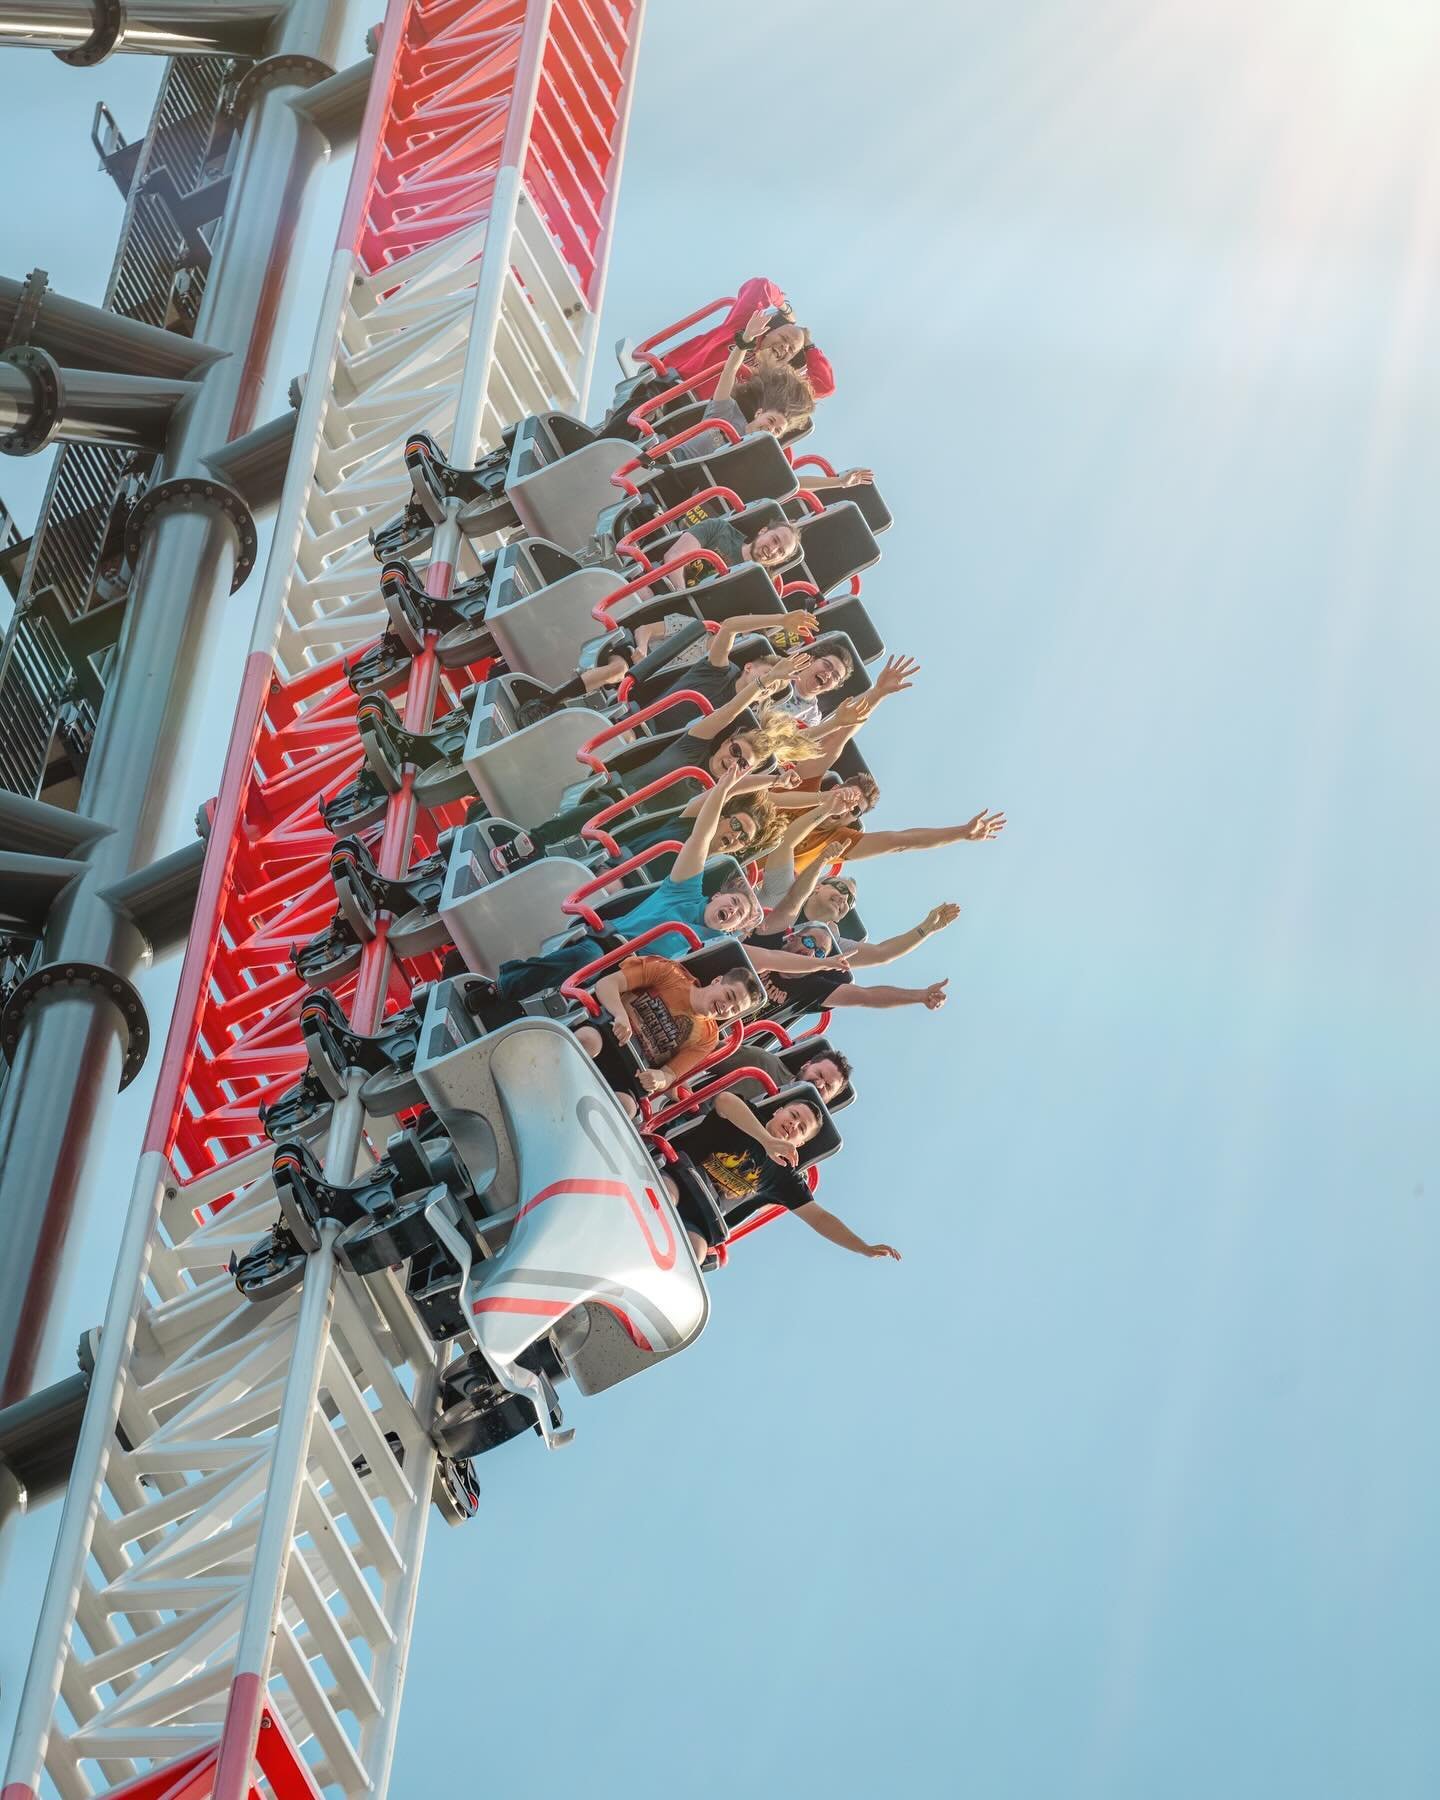 Top Thrill 2 is FUN!! Say what you will about what it no longer is, but it is still so much hands-up, crazy fast, airtime-filled fun!! 
.
🎢 Top Thrill 2 - Cedar Point (@cedarpoint)
.
.
⚙️ Antonio Zamperla spA (@zamperlacoasters) 
.
.
📸: @cedarpoint